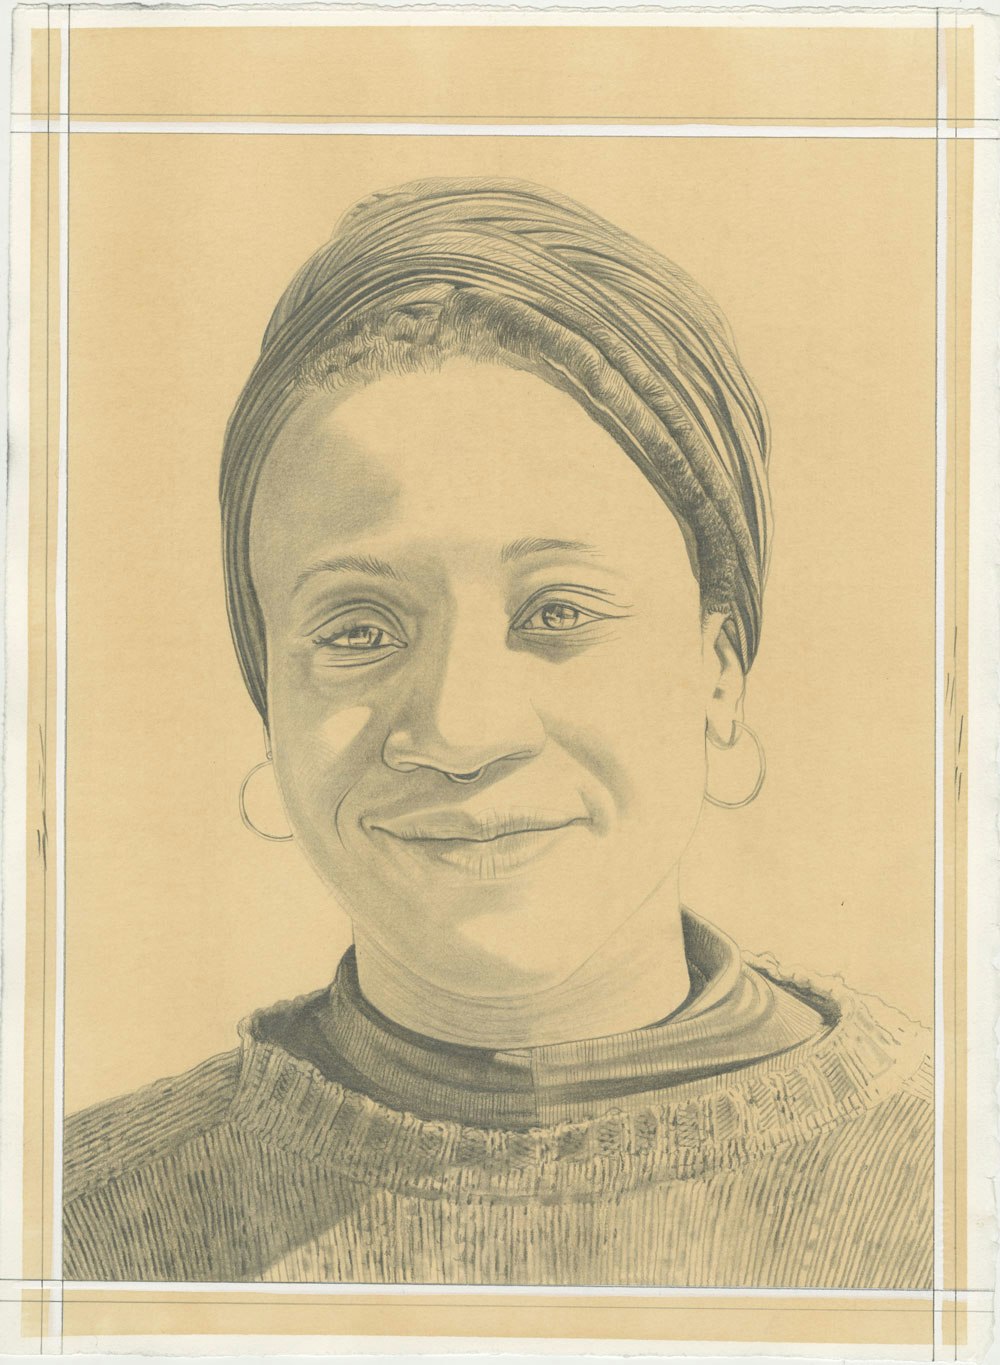 Rachel Eulena Williams, pencil on paper by Phong H. Bui.